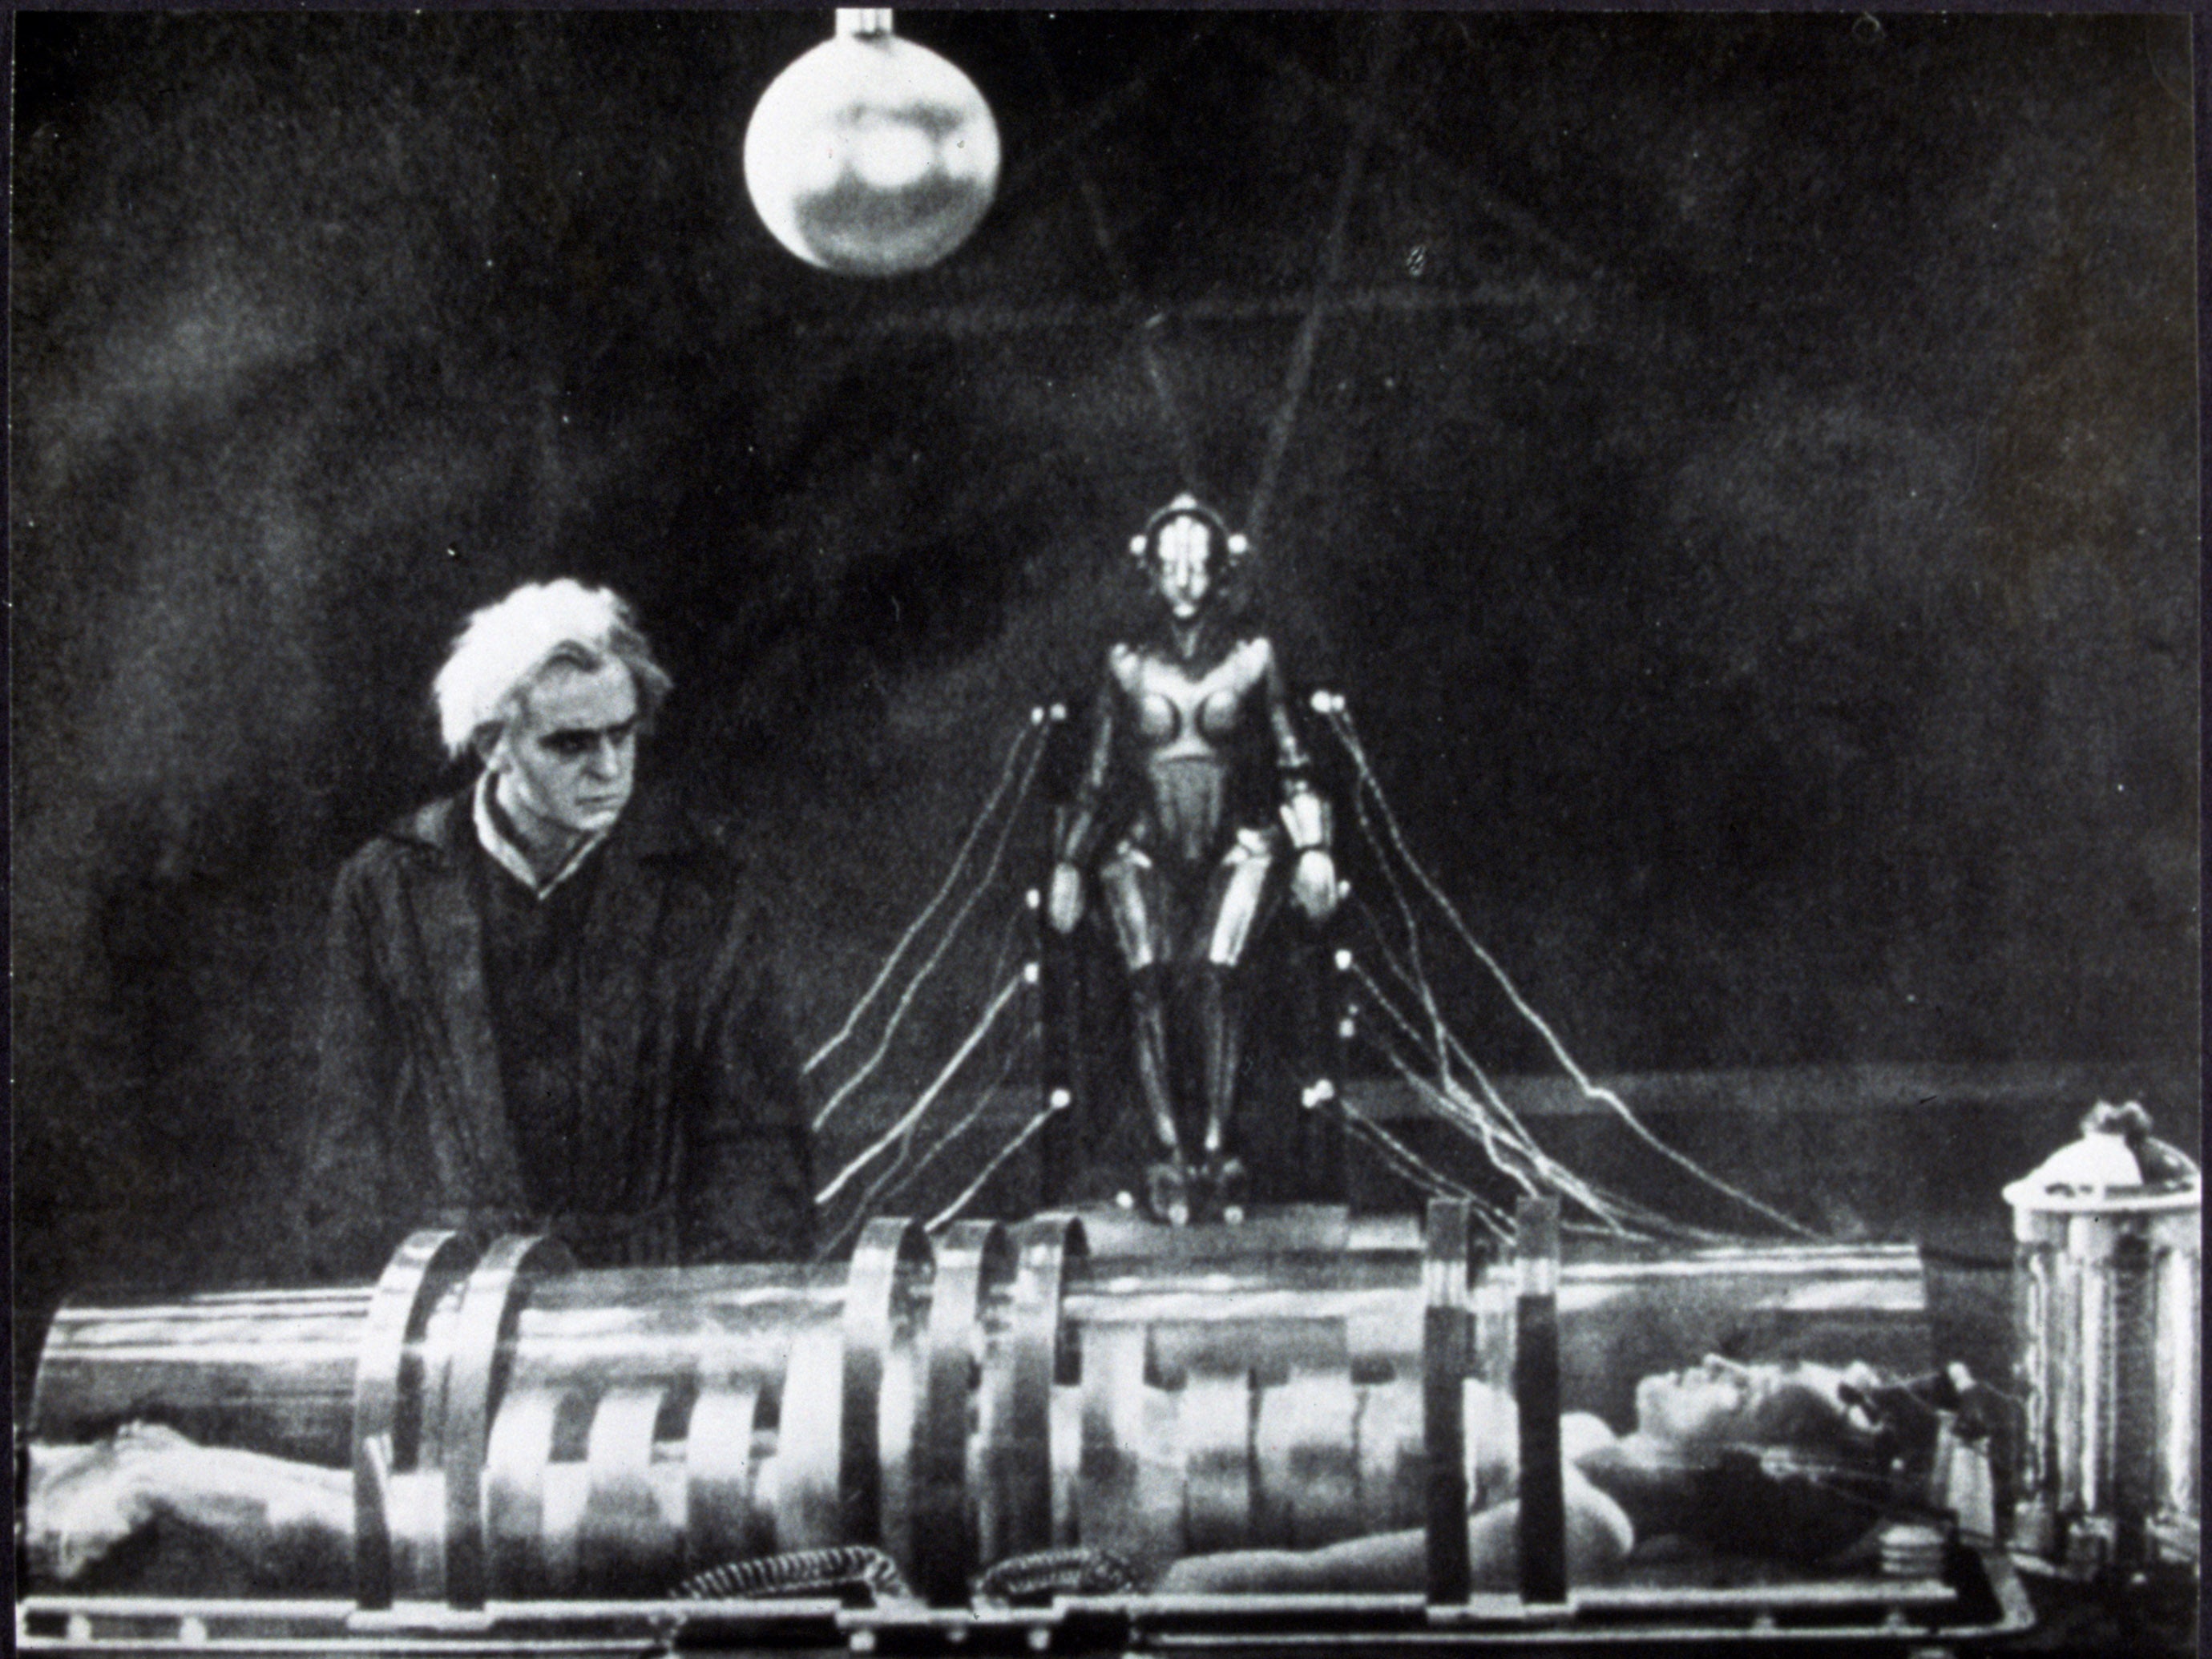 ‘Metropolis’ (1927) shows the visual side of things ages much faster than the concepts